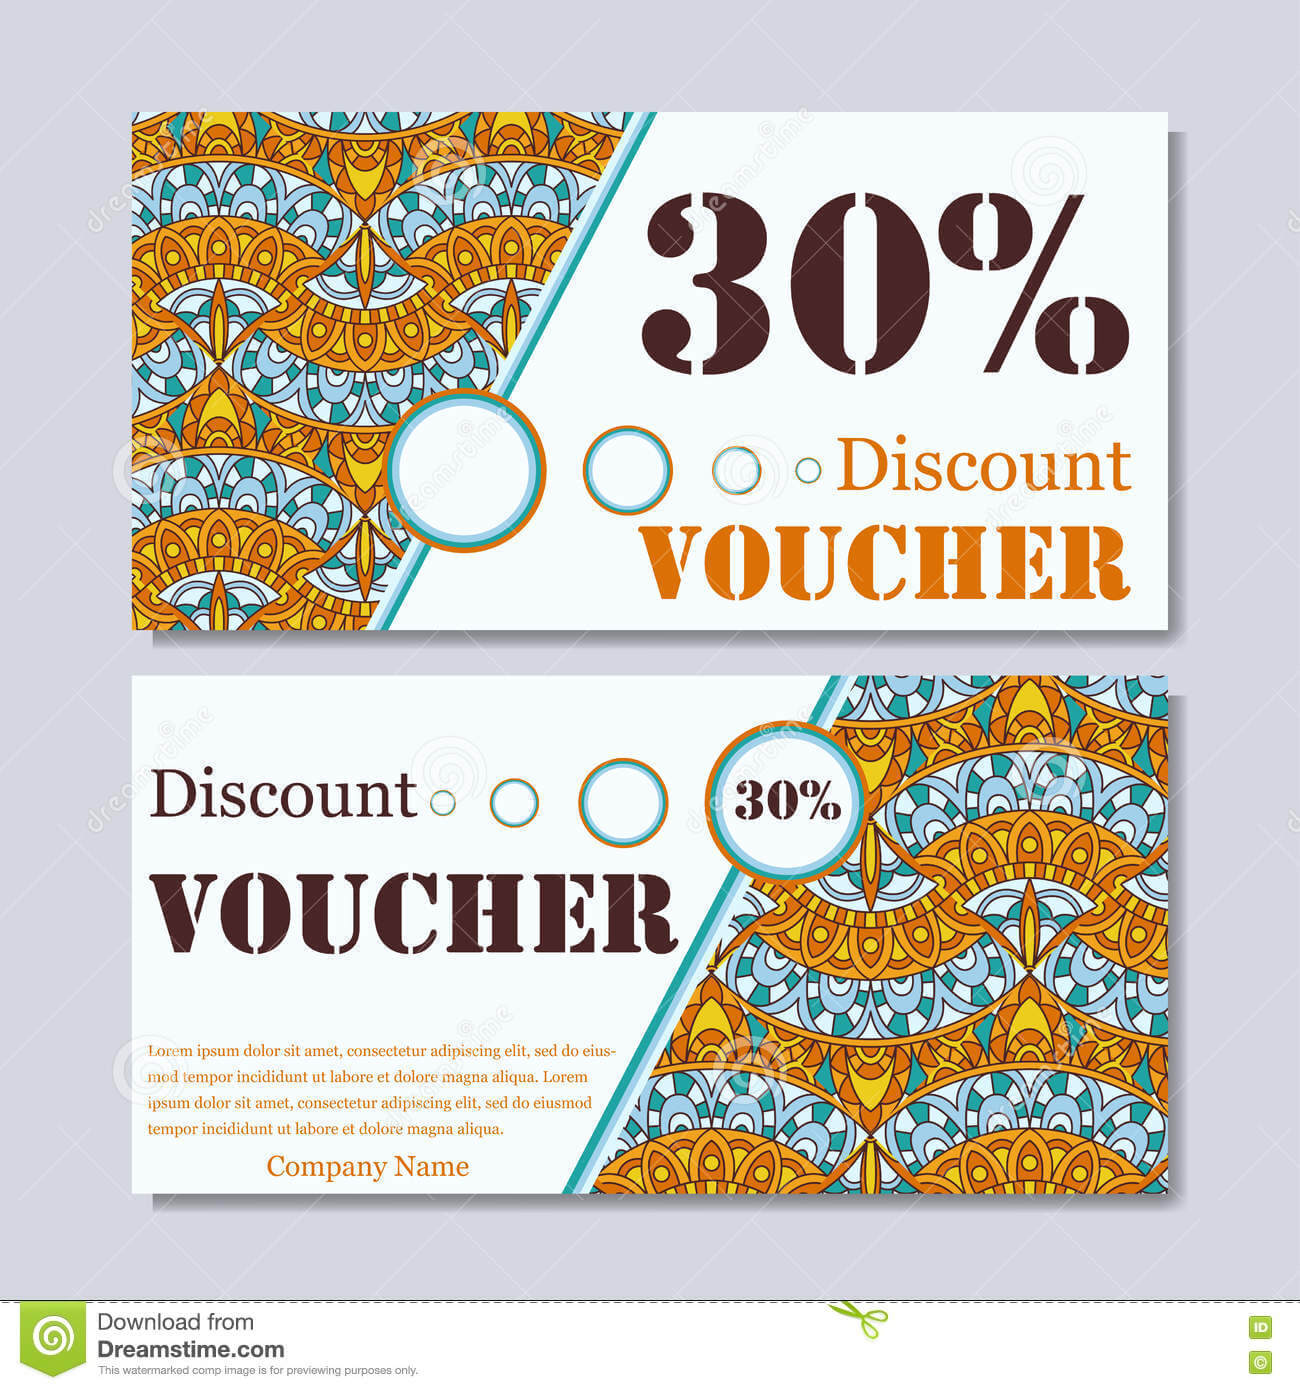 Gift Voucher Template With Mandala. Design Certificate For For Magazine Subscription Gift Certificate Template